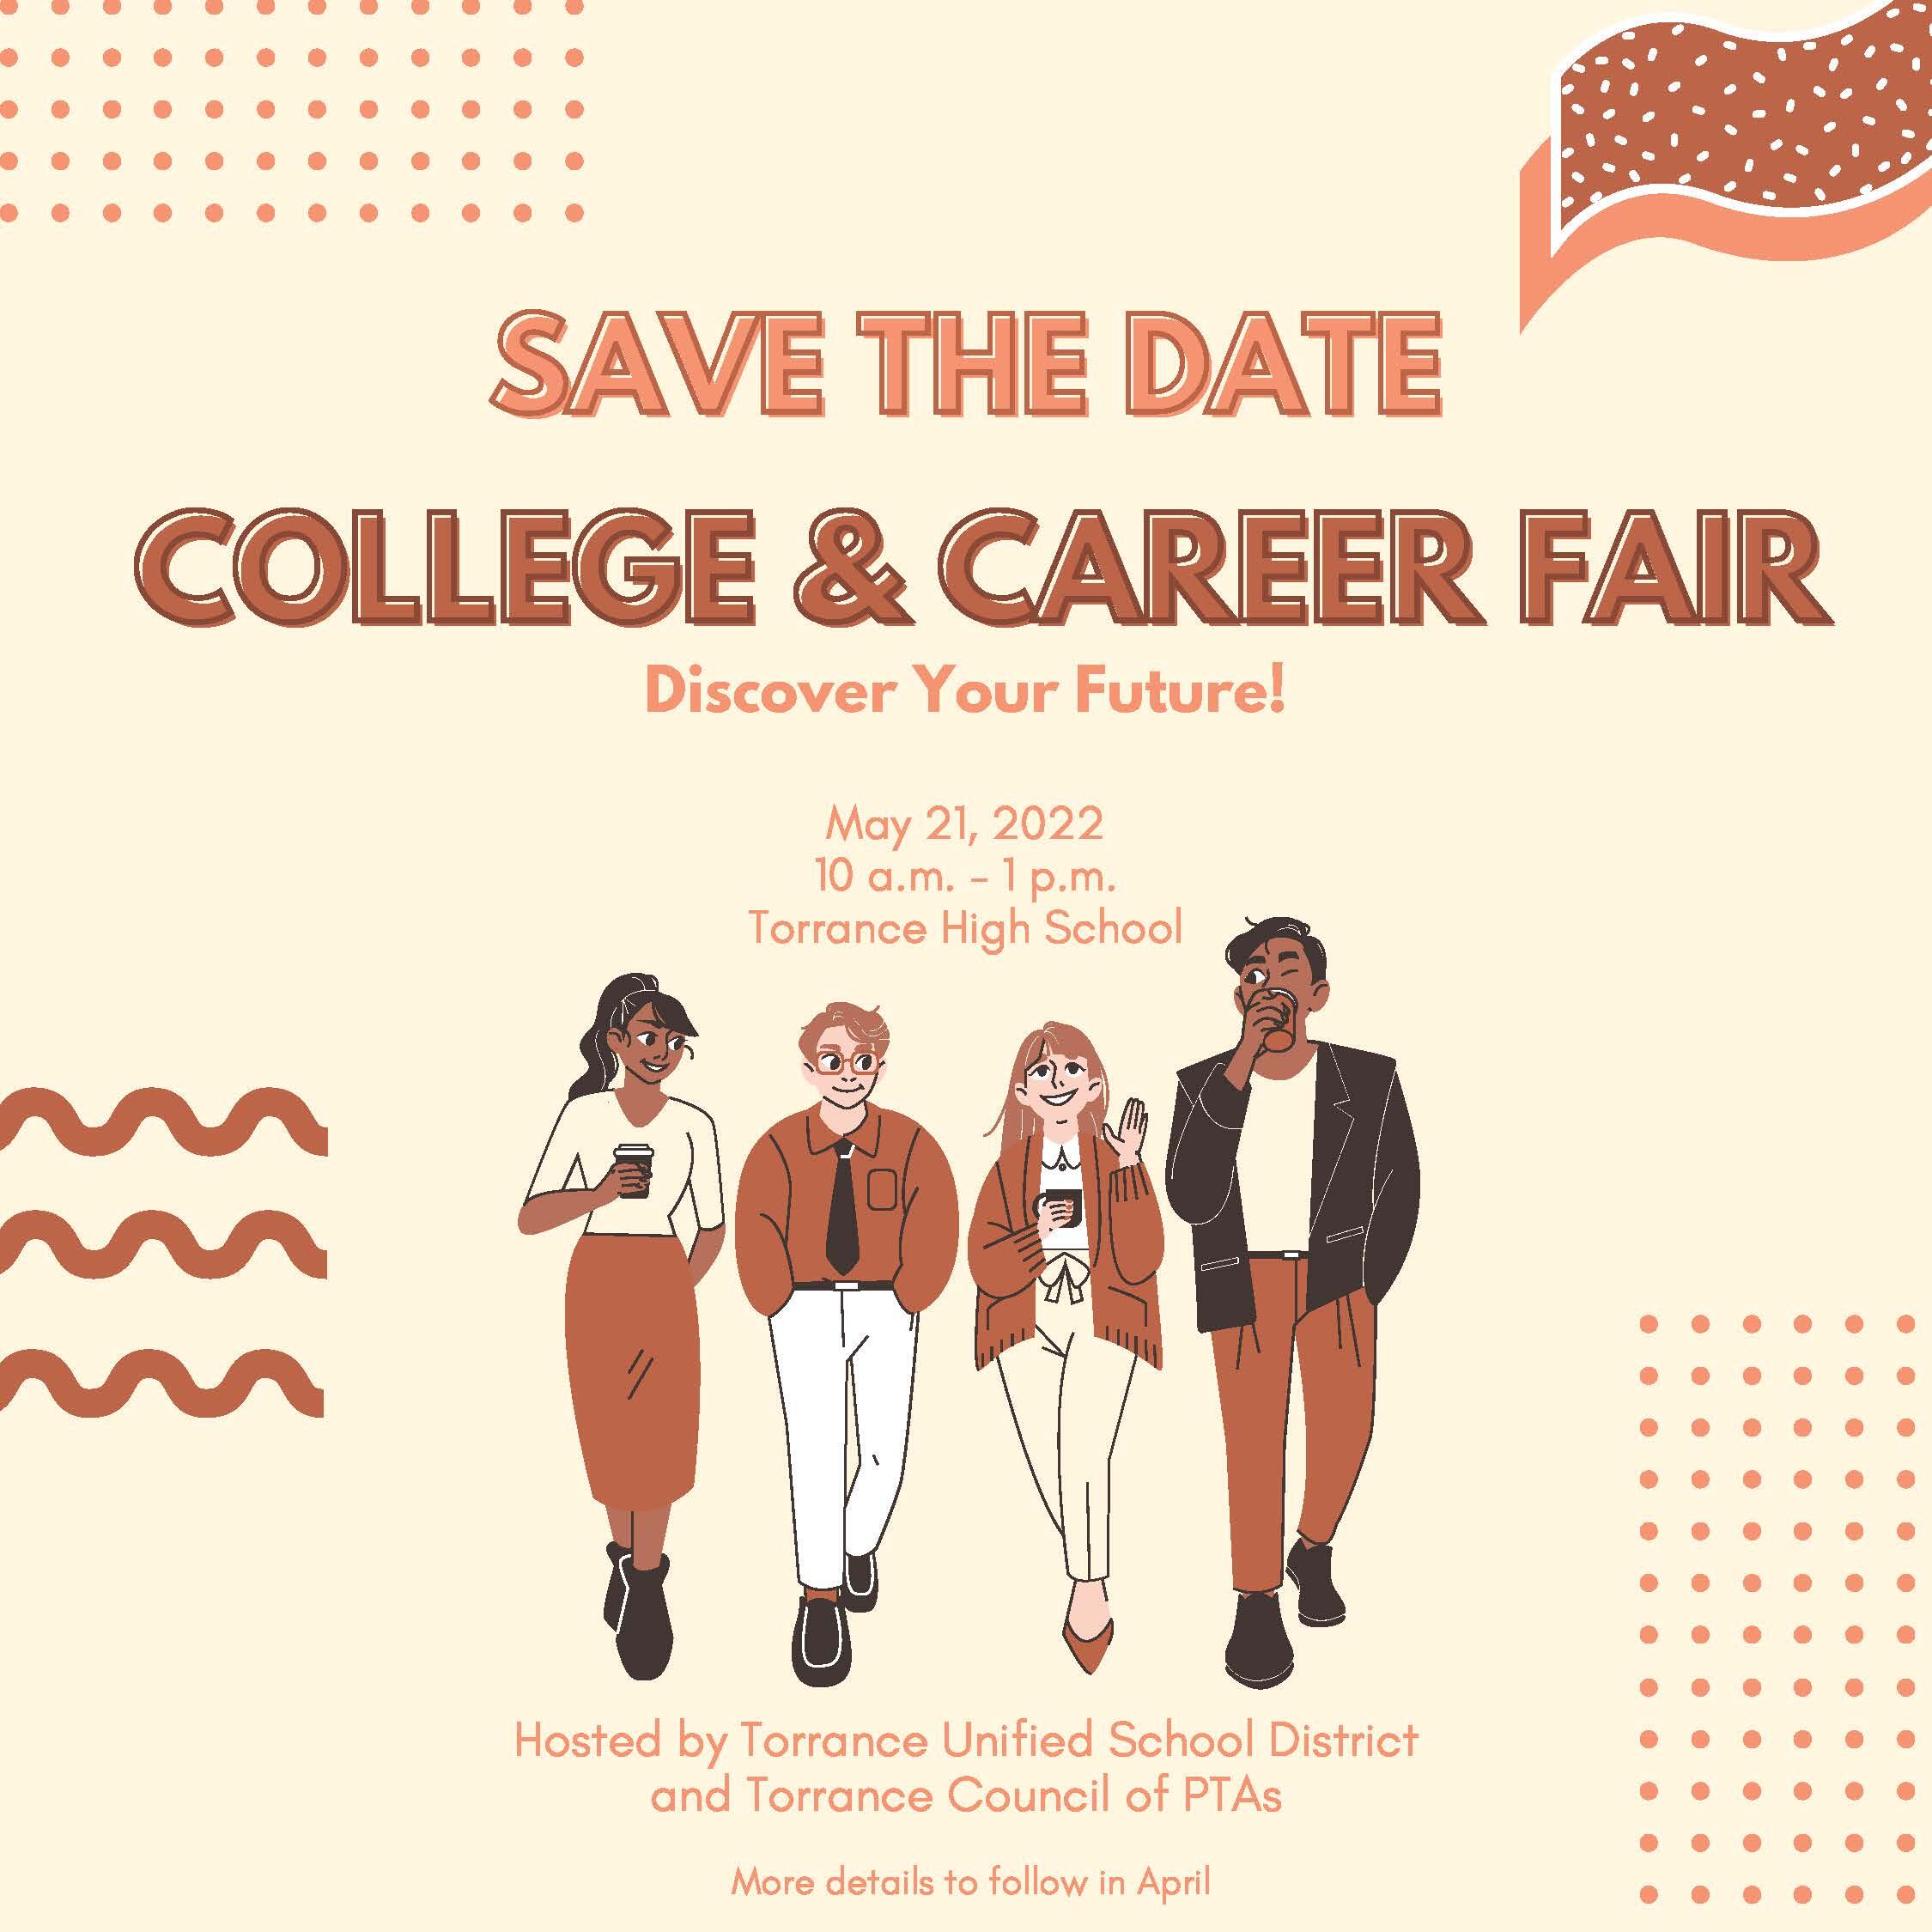 Save the Date - College & Career Fair